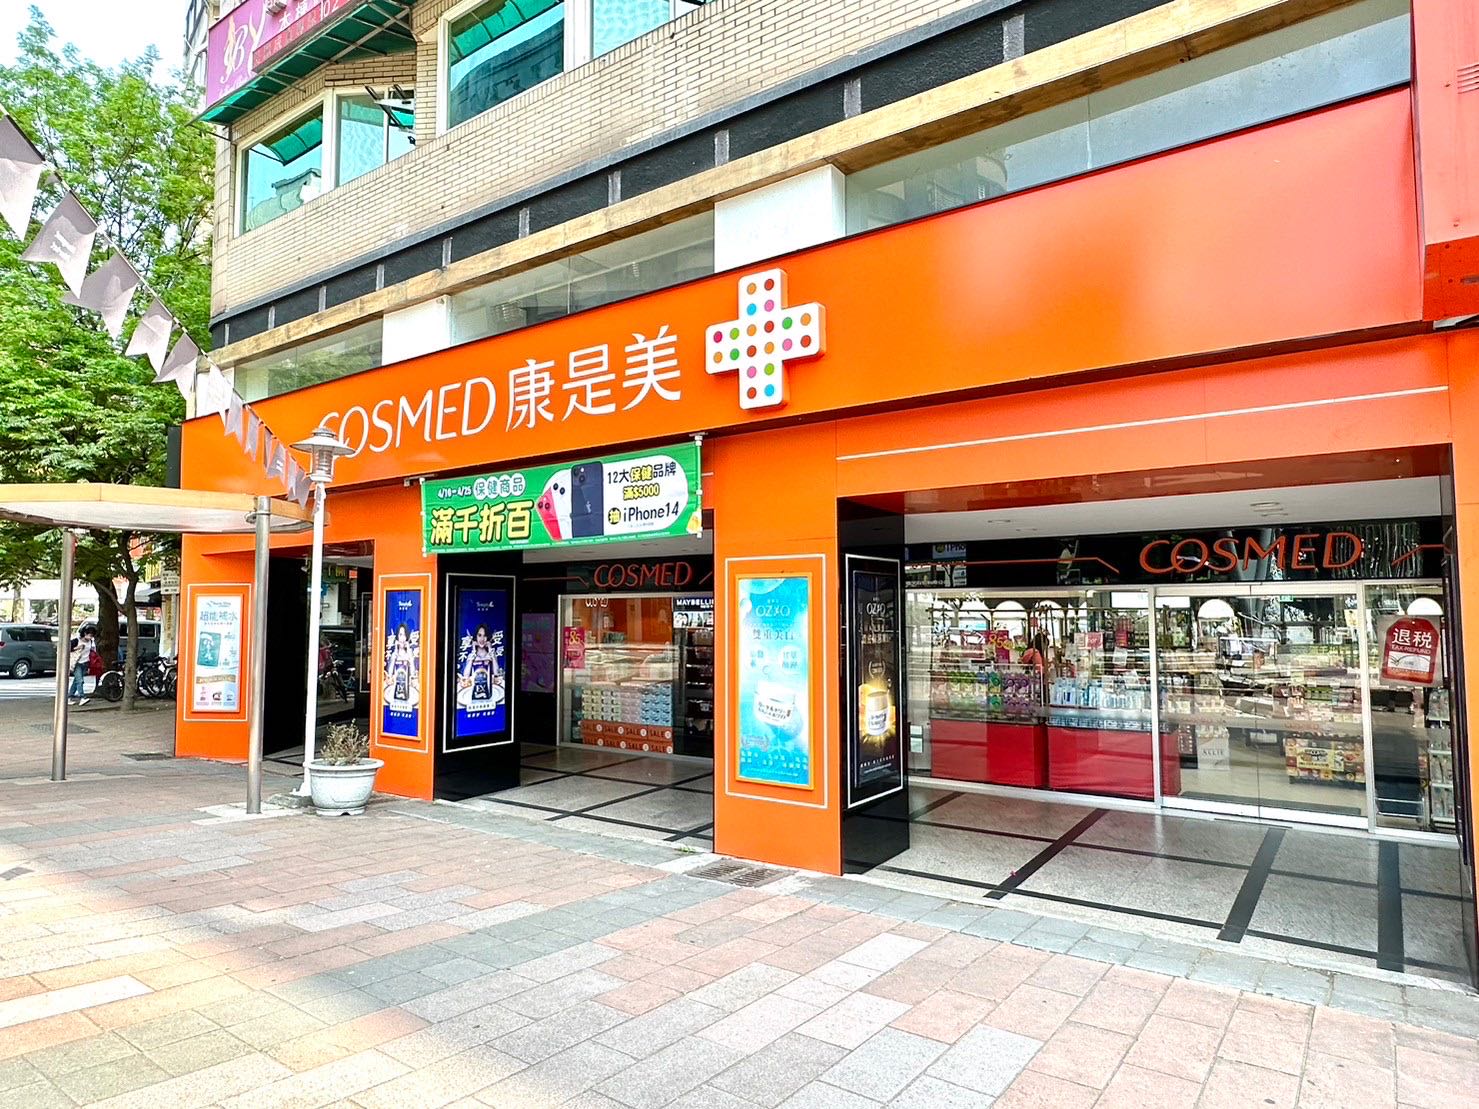 you can search for skincare products in COSMED if you visit Taiwan